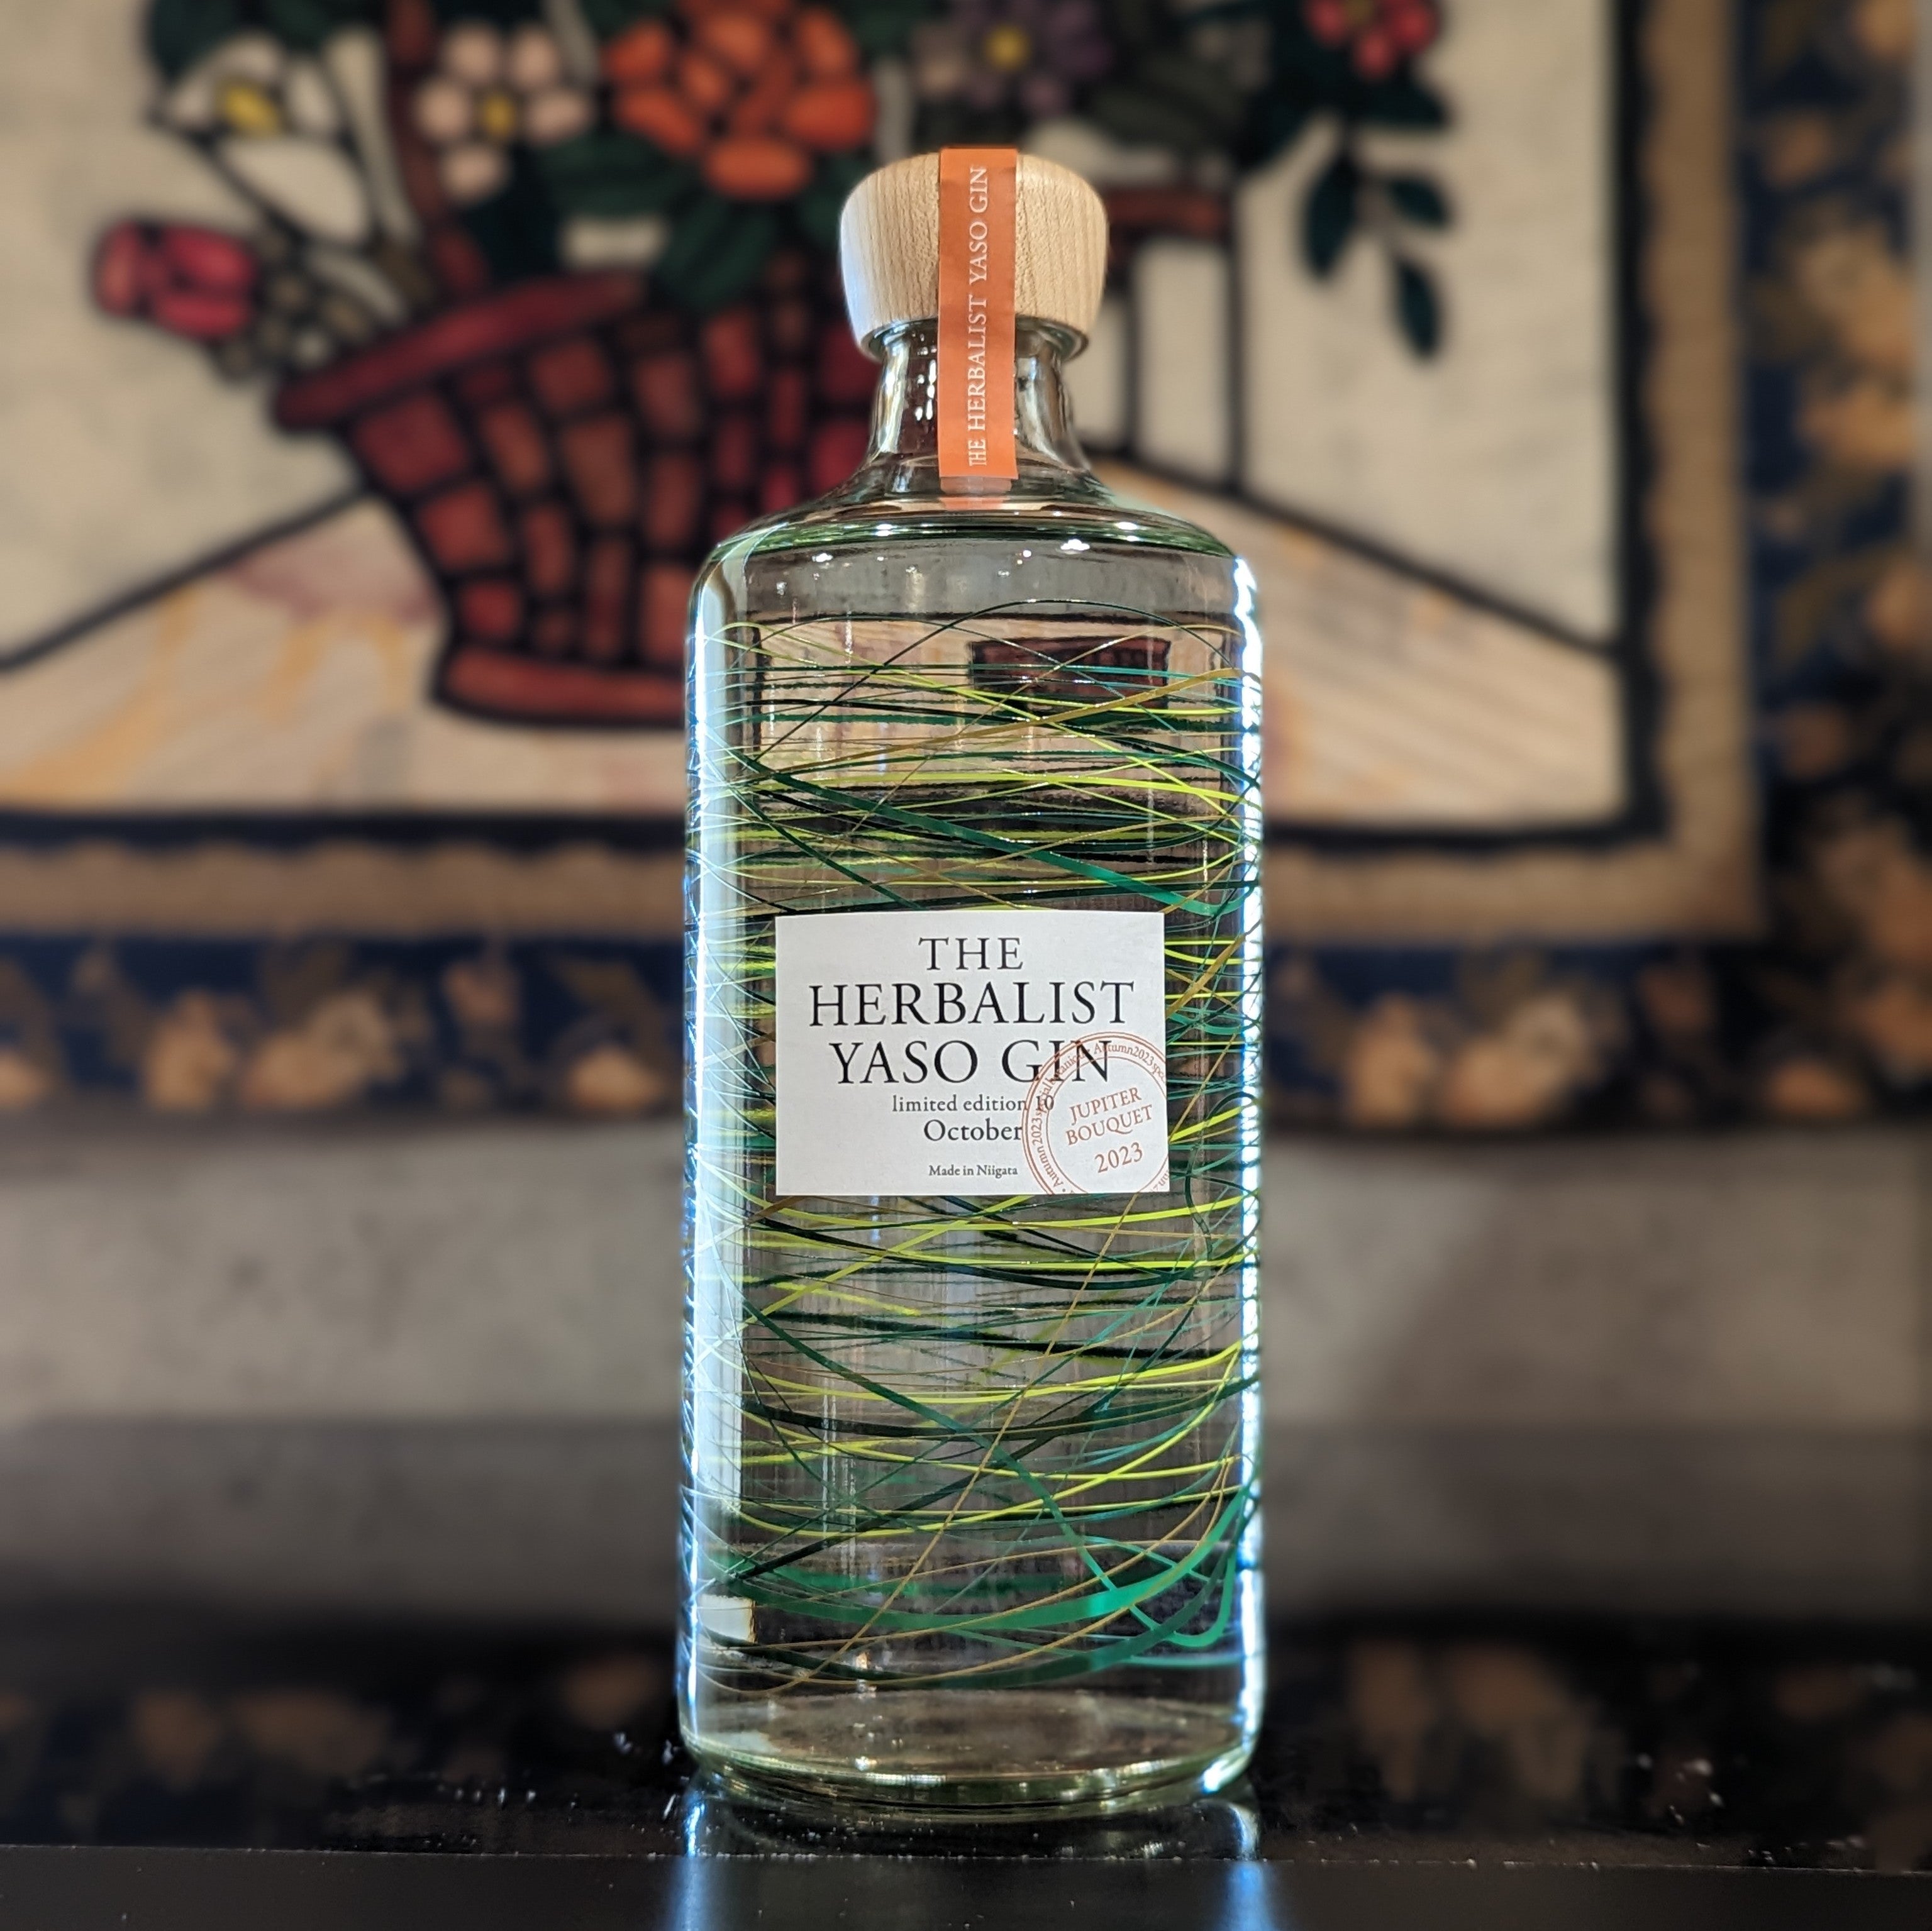 THE HERBALIST YASO GIN Limited edition 10 October ジュピターブーケ 